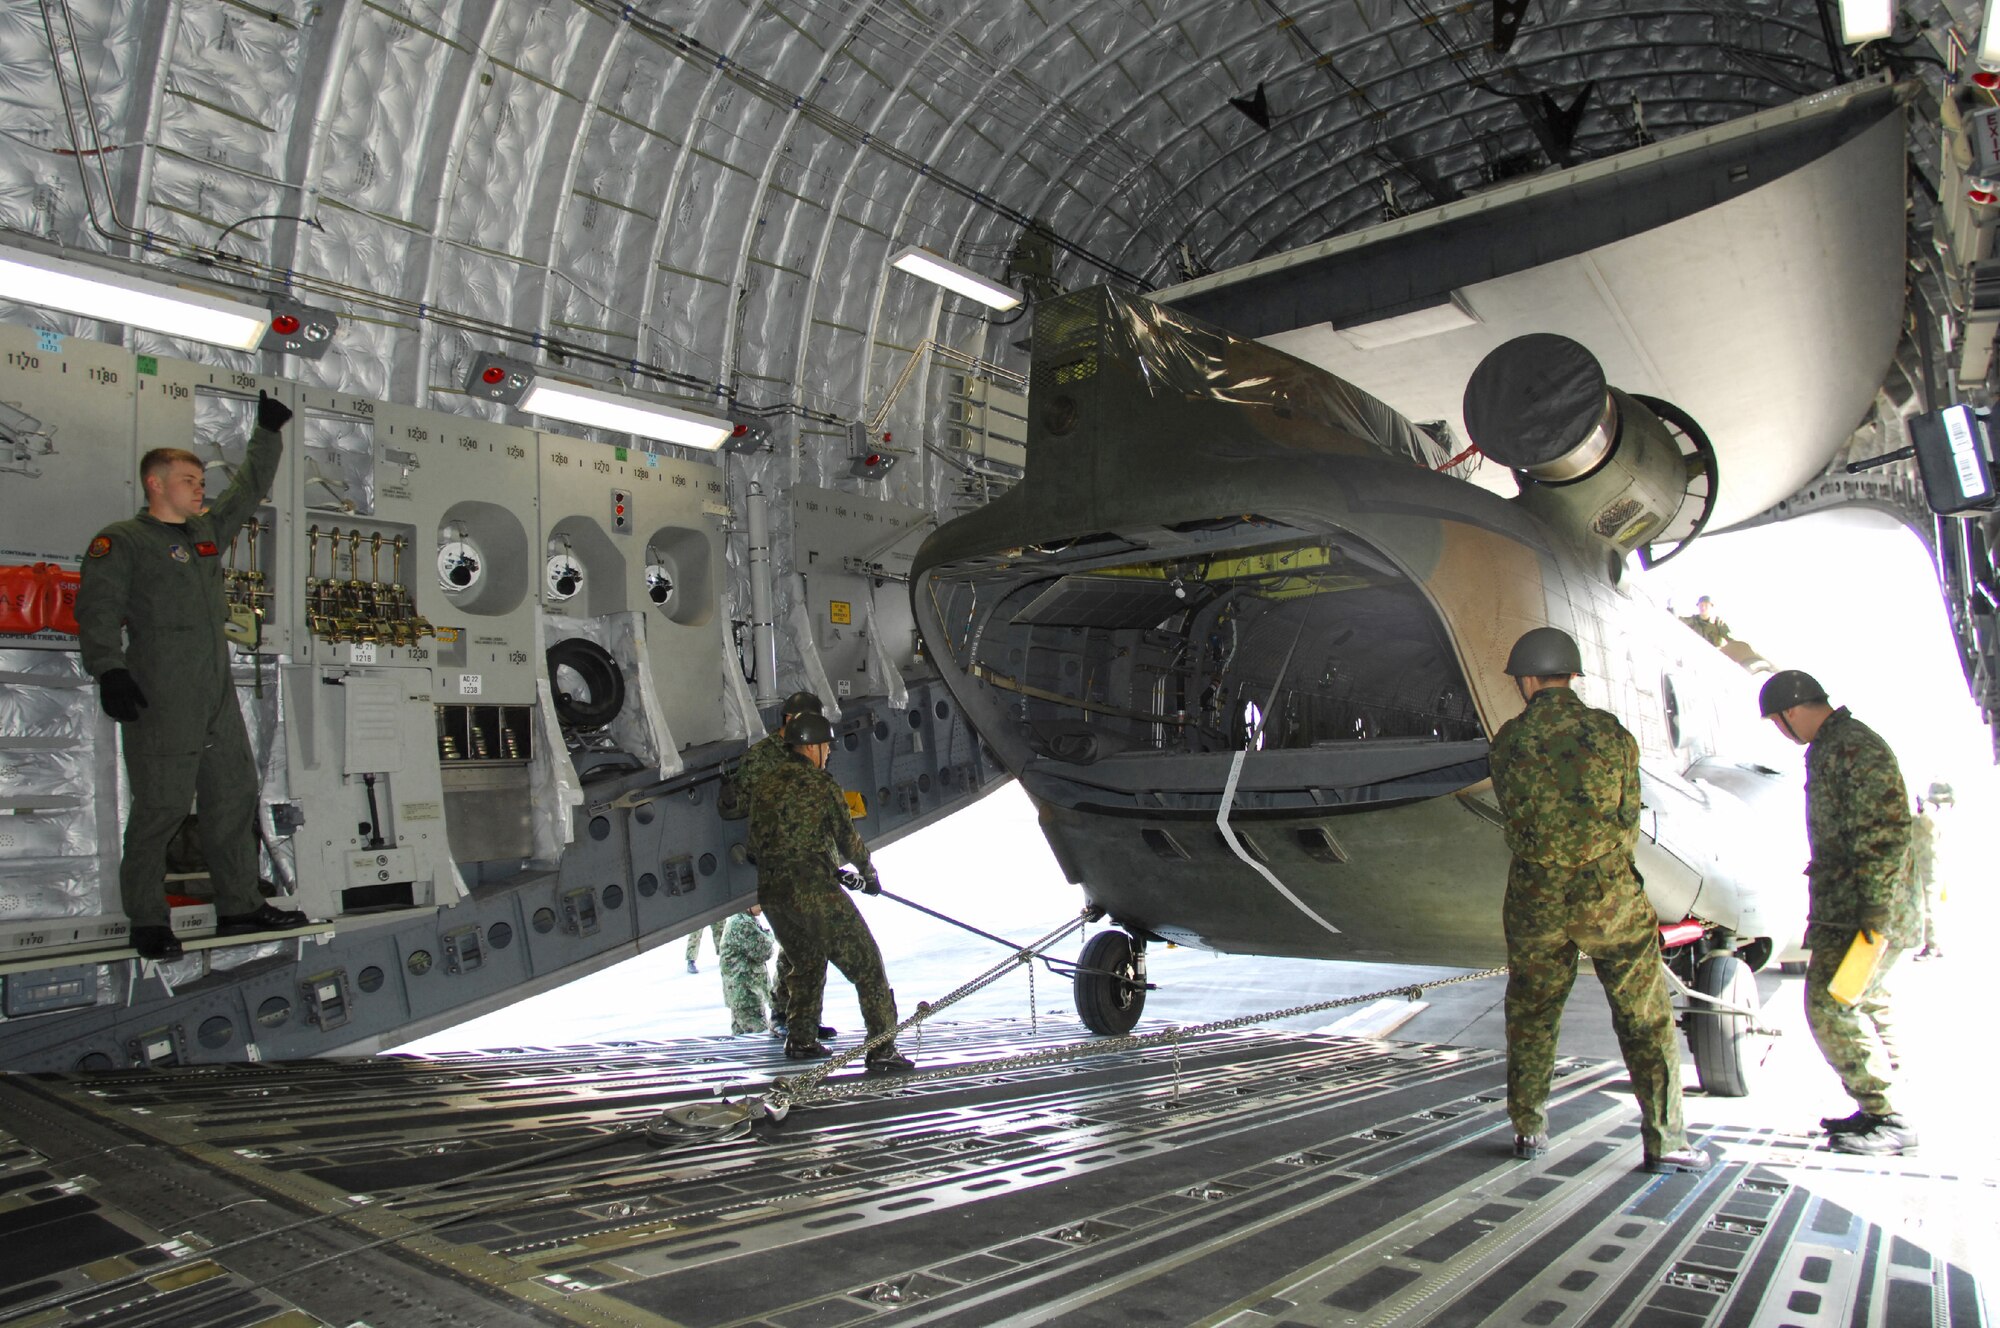 YOKOTA AIR BASE, Japan -- U.S. Air Force Staff Sgt. Ryan Boehm, left, directs the loading of a Japan Ground Self Defense Force CH-47J Chinook helicopter into a U.S. Air Force C-17 Globemaster III cargo plane Feb. 23. It was the first time a Japanese aircraft has been loaded into another nation's aircraft. The demonstration took place the last morning of the Pacific Global Air Mobility Seminar held Feb. 22 and 23. The CH-47J is assigned to the 1st Helicopter Brigade at JGSDF Camp Kisarazu in Kisarazu City, Chiba Prefecture.  Sergeant Boehm is a loadmaster assigned to the 535th Airlift Squadron, Hickam Air Force Base, Hawaii. The C-17 is also assigned to the 535th Airlift Squadron. (U.S. Air Force photo by Osakabe Yasuo)